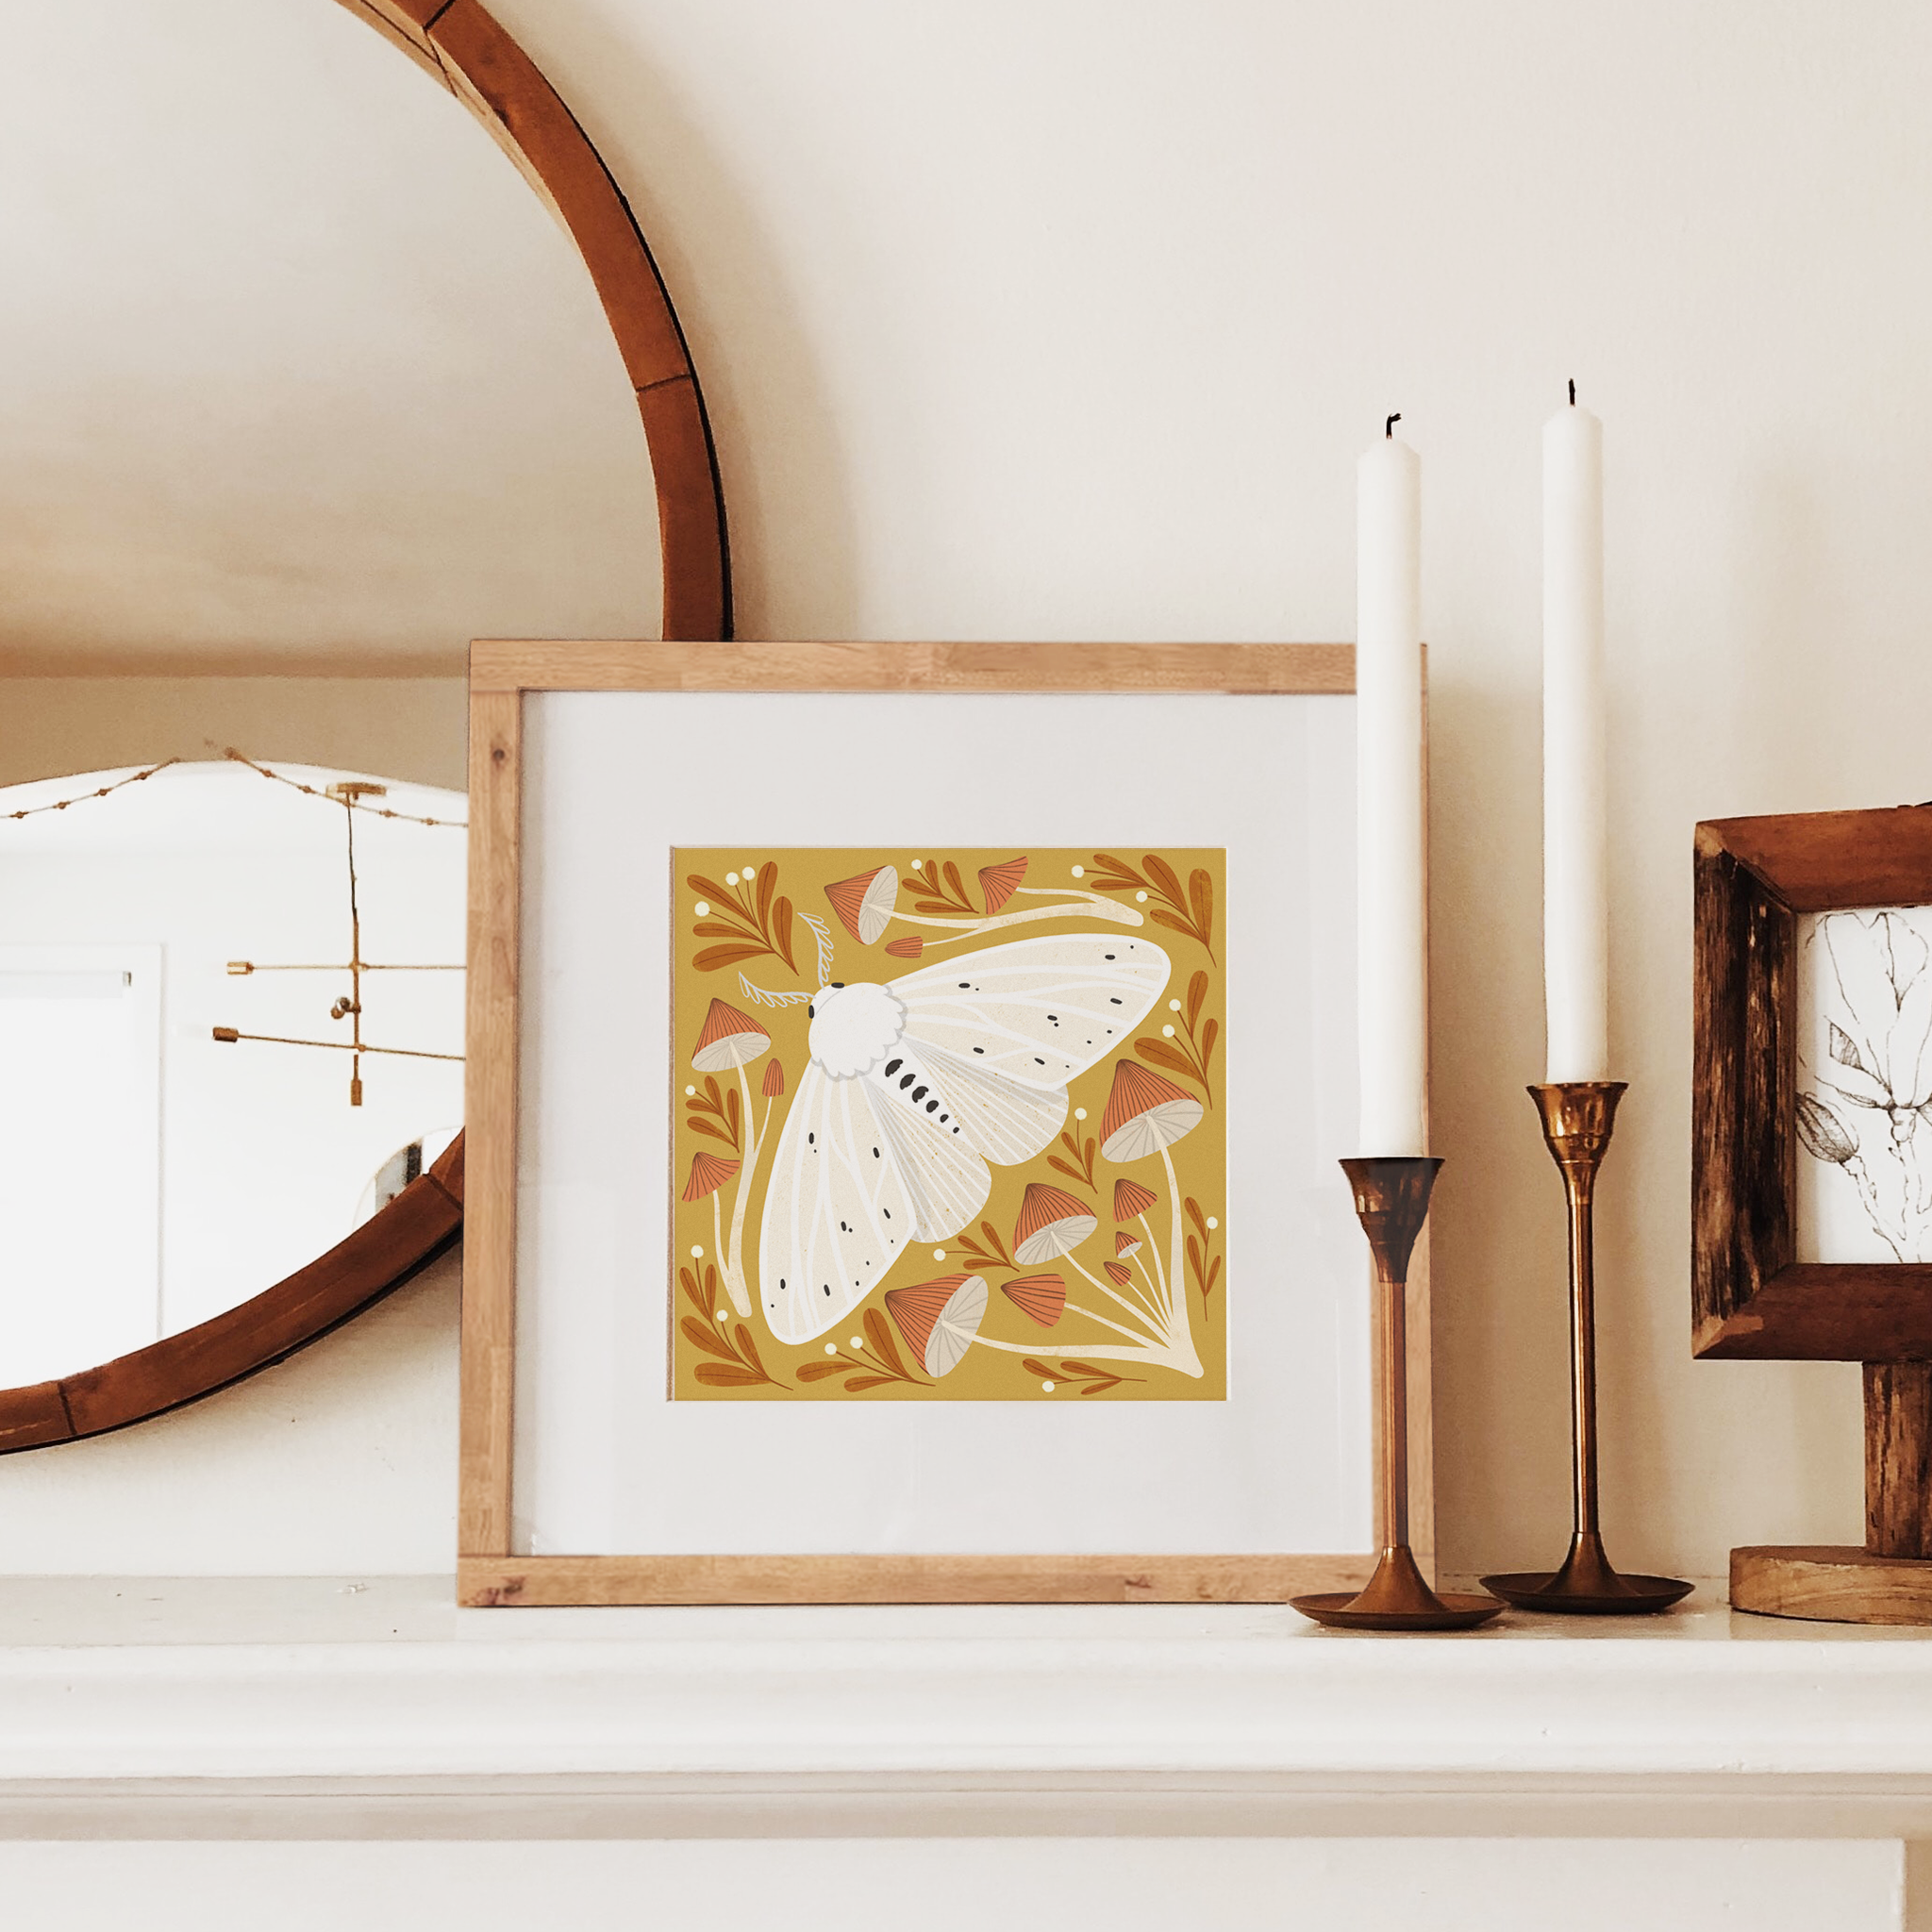 art print showing an agreeable tiger moth in black and white on a mustard yellow background, surrounded by red and white whimsical mushrooms. shown displayed in a wood frame, resting on a mantle.